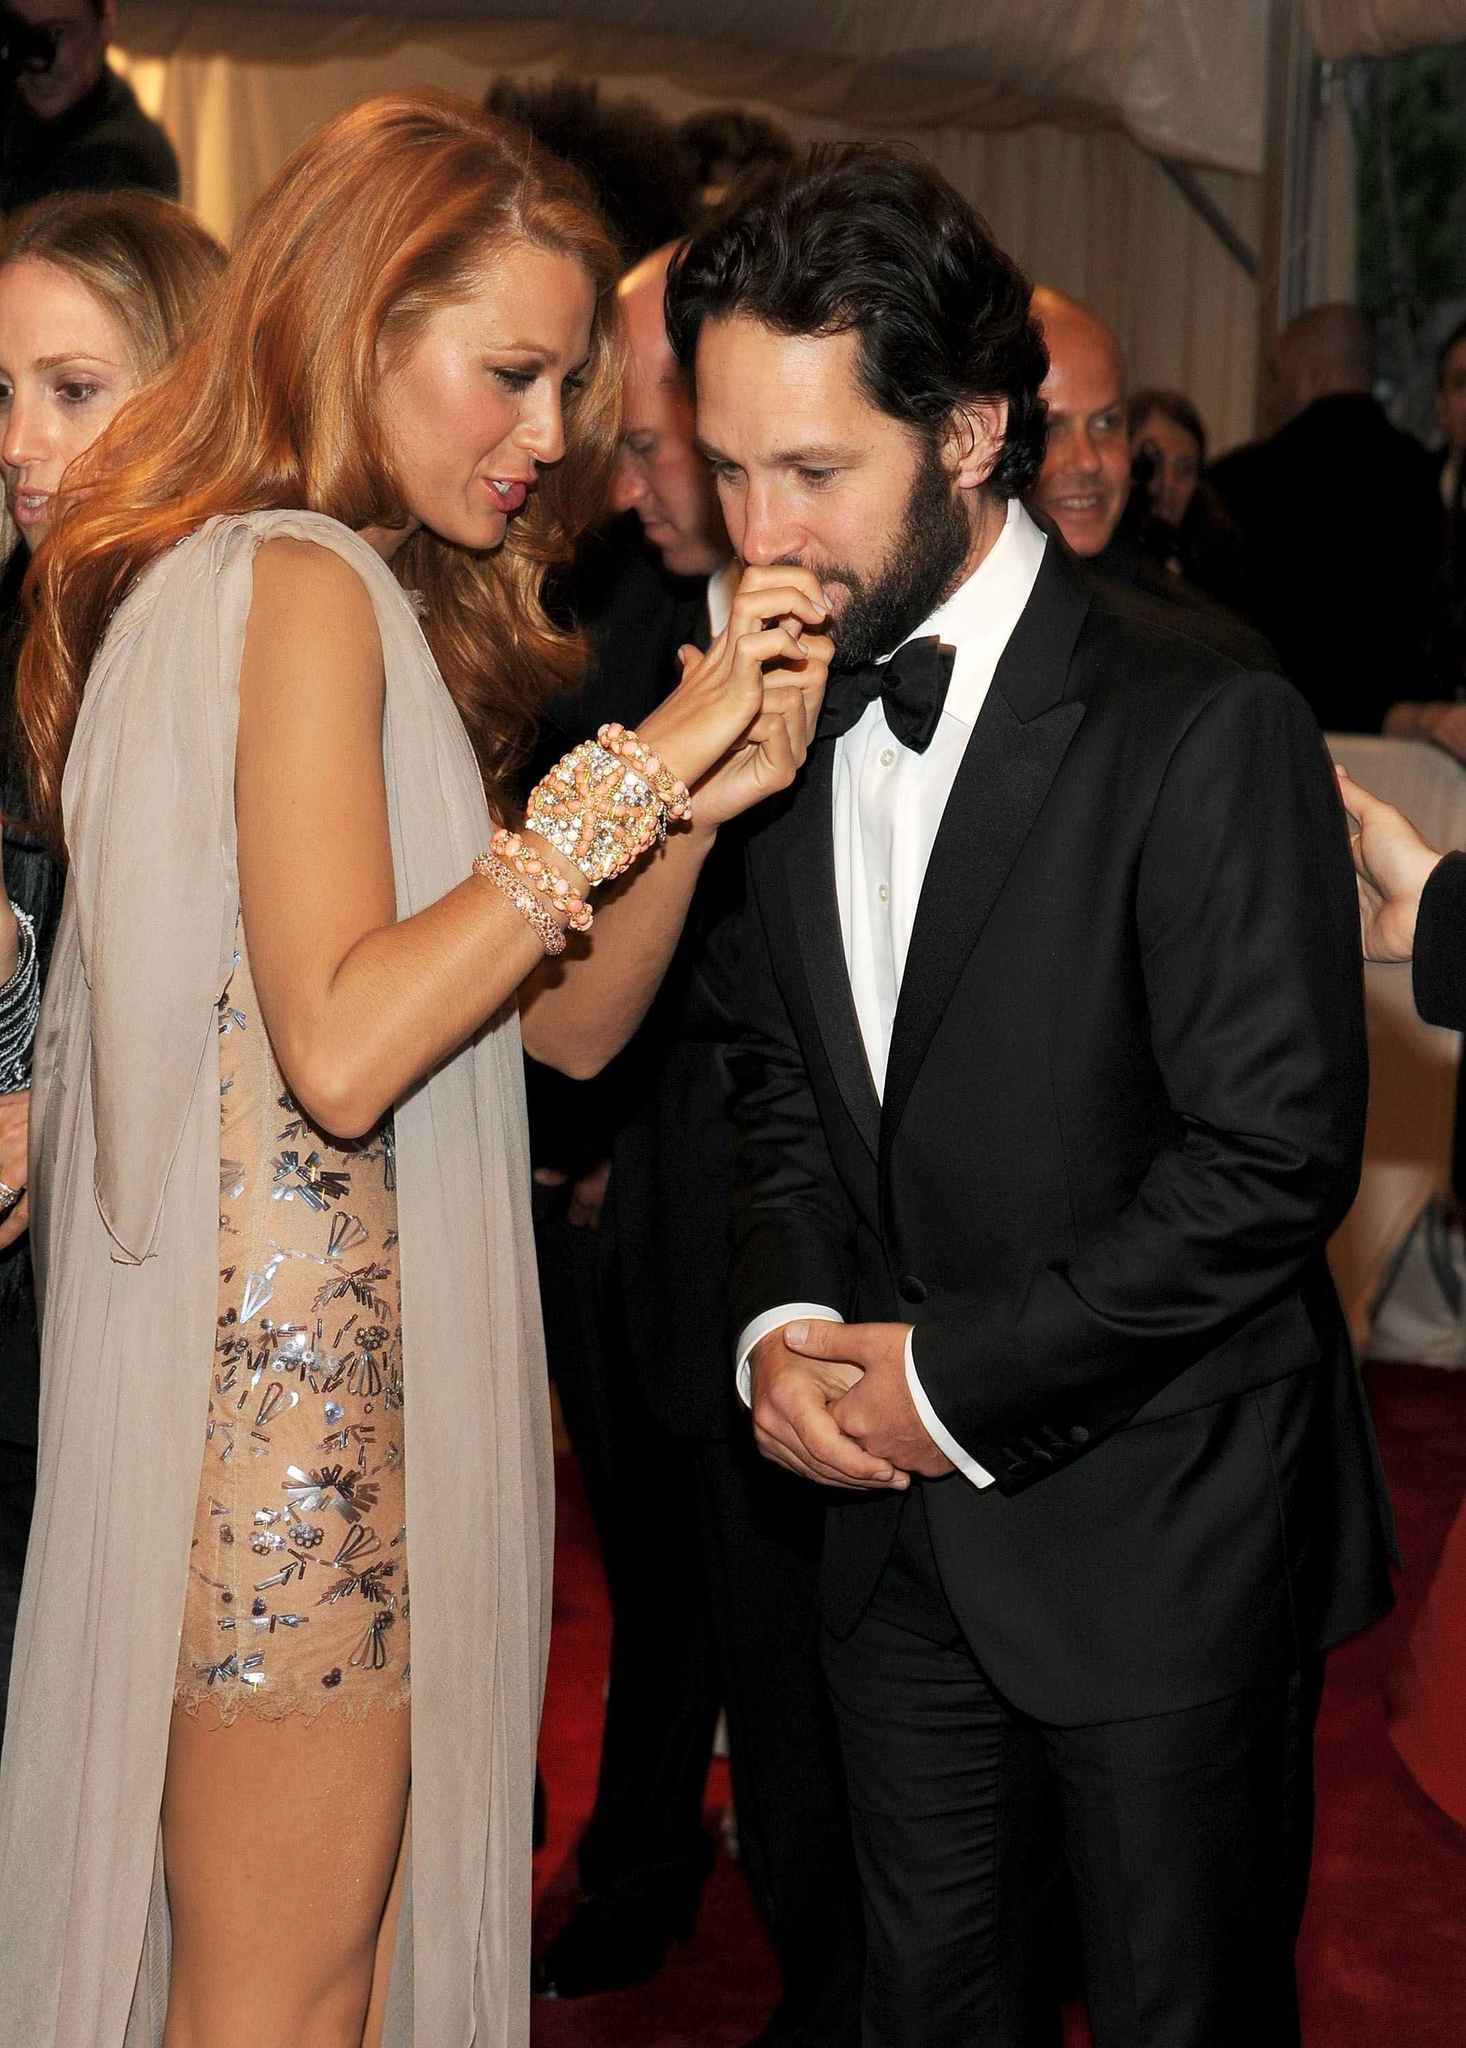 Blake Lively and Paul Rudd